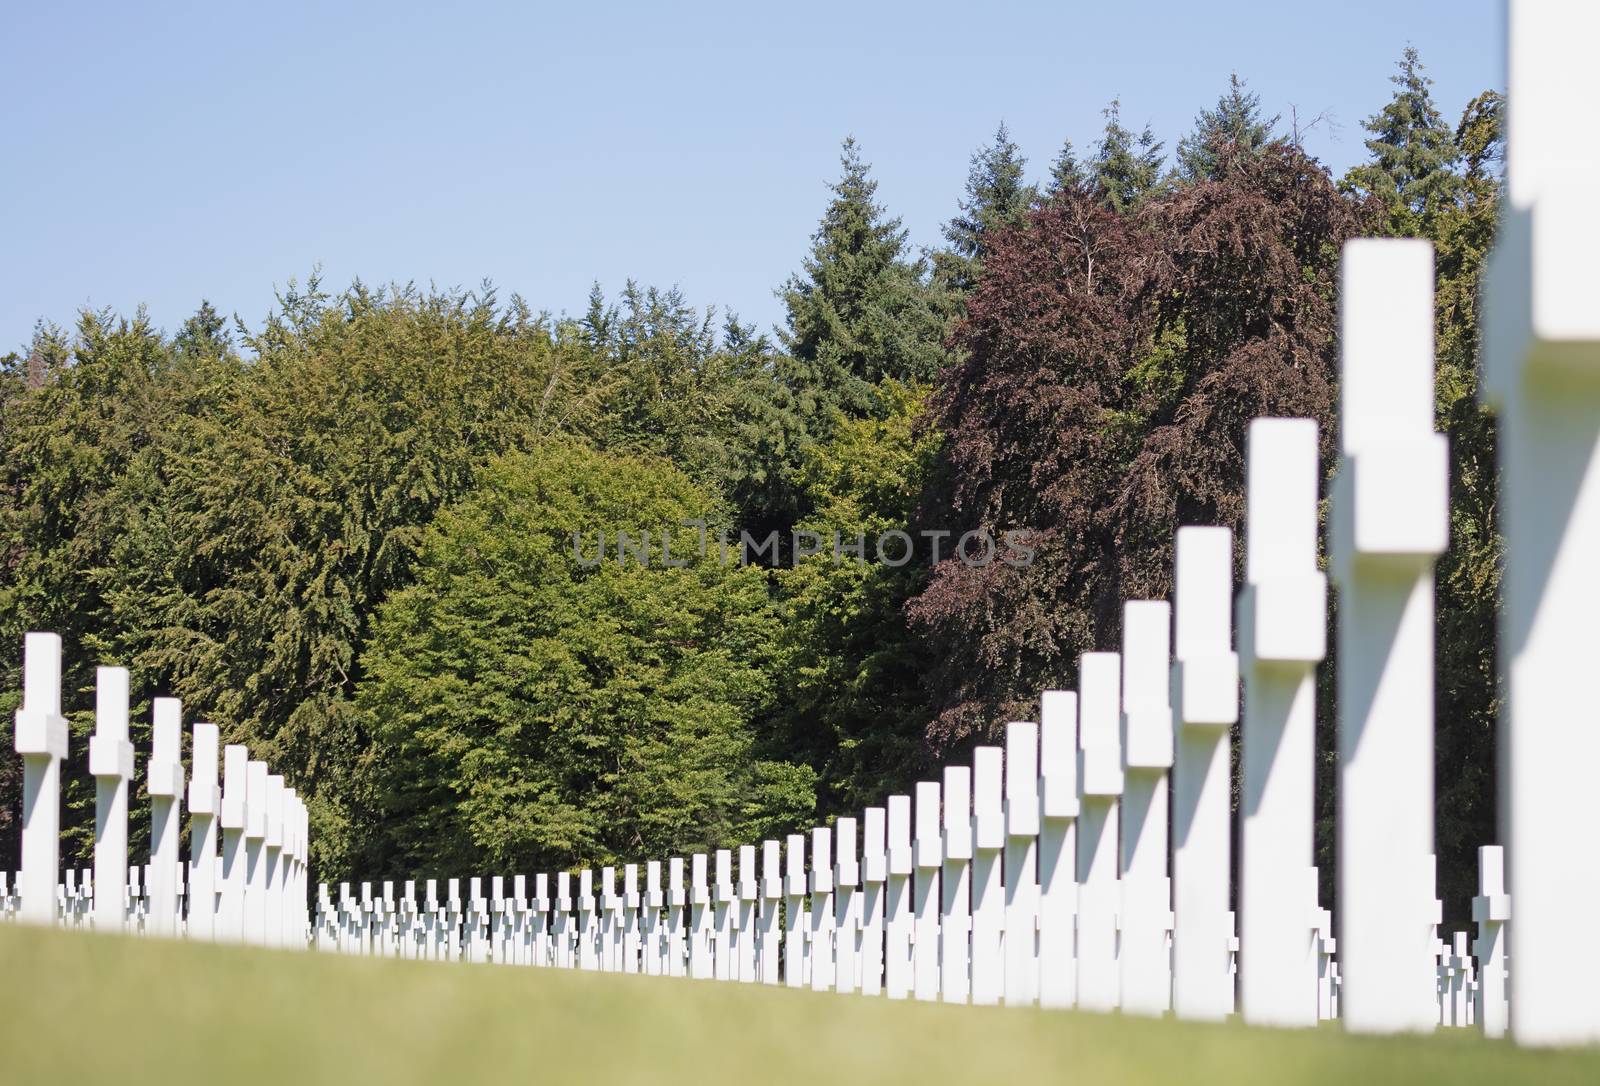 The American military cemetary in Luxembourg by michaklootwijk